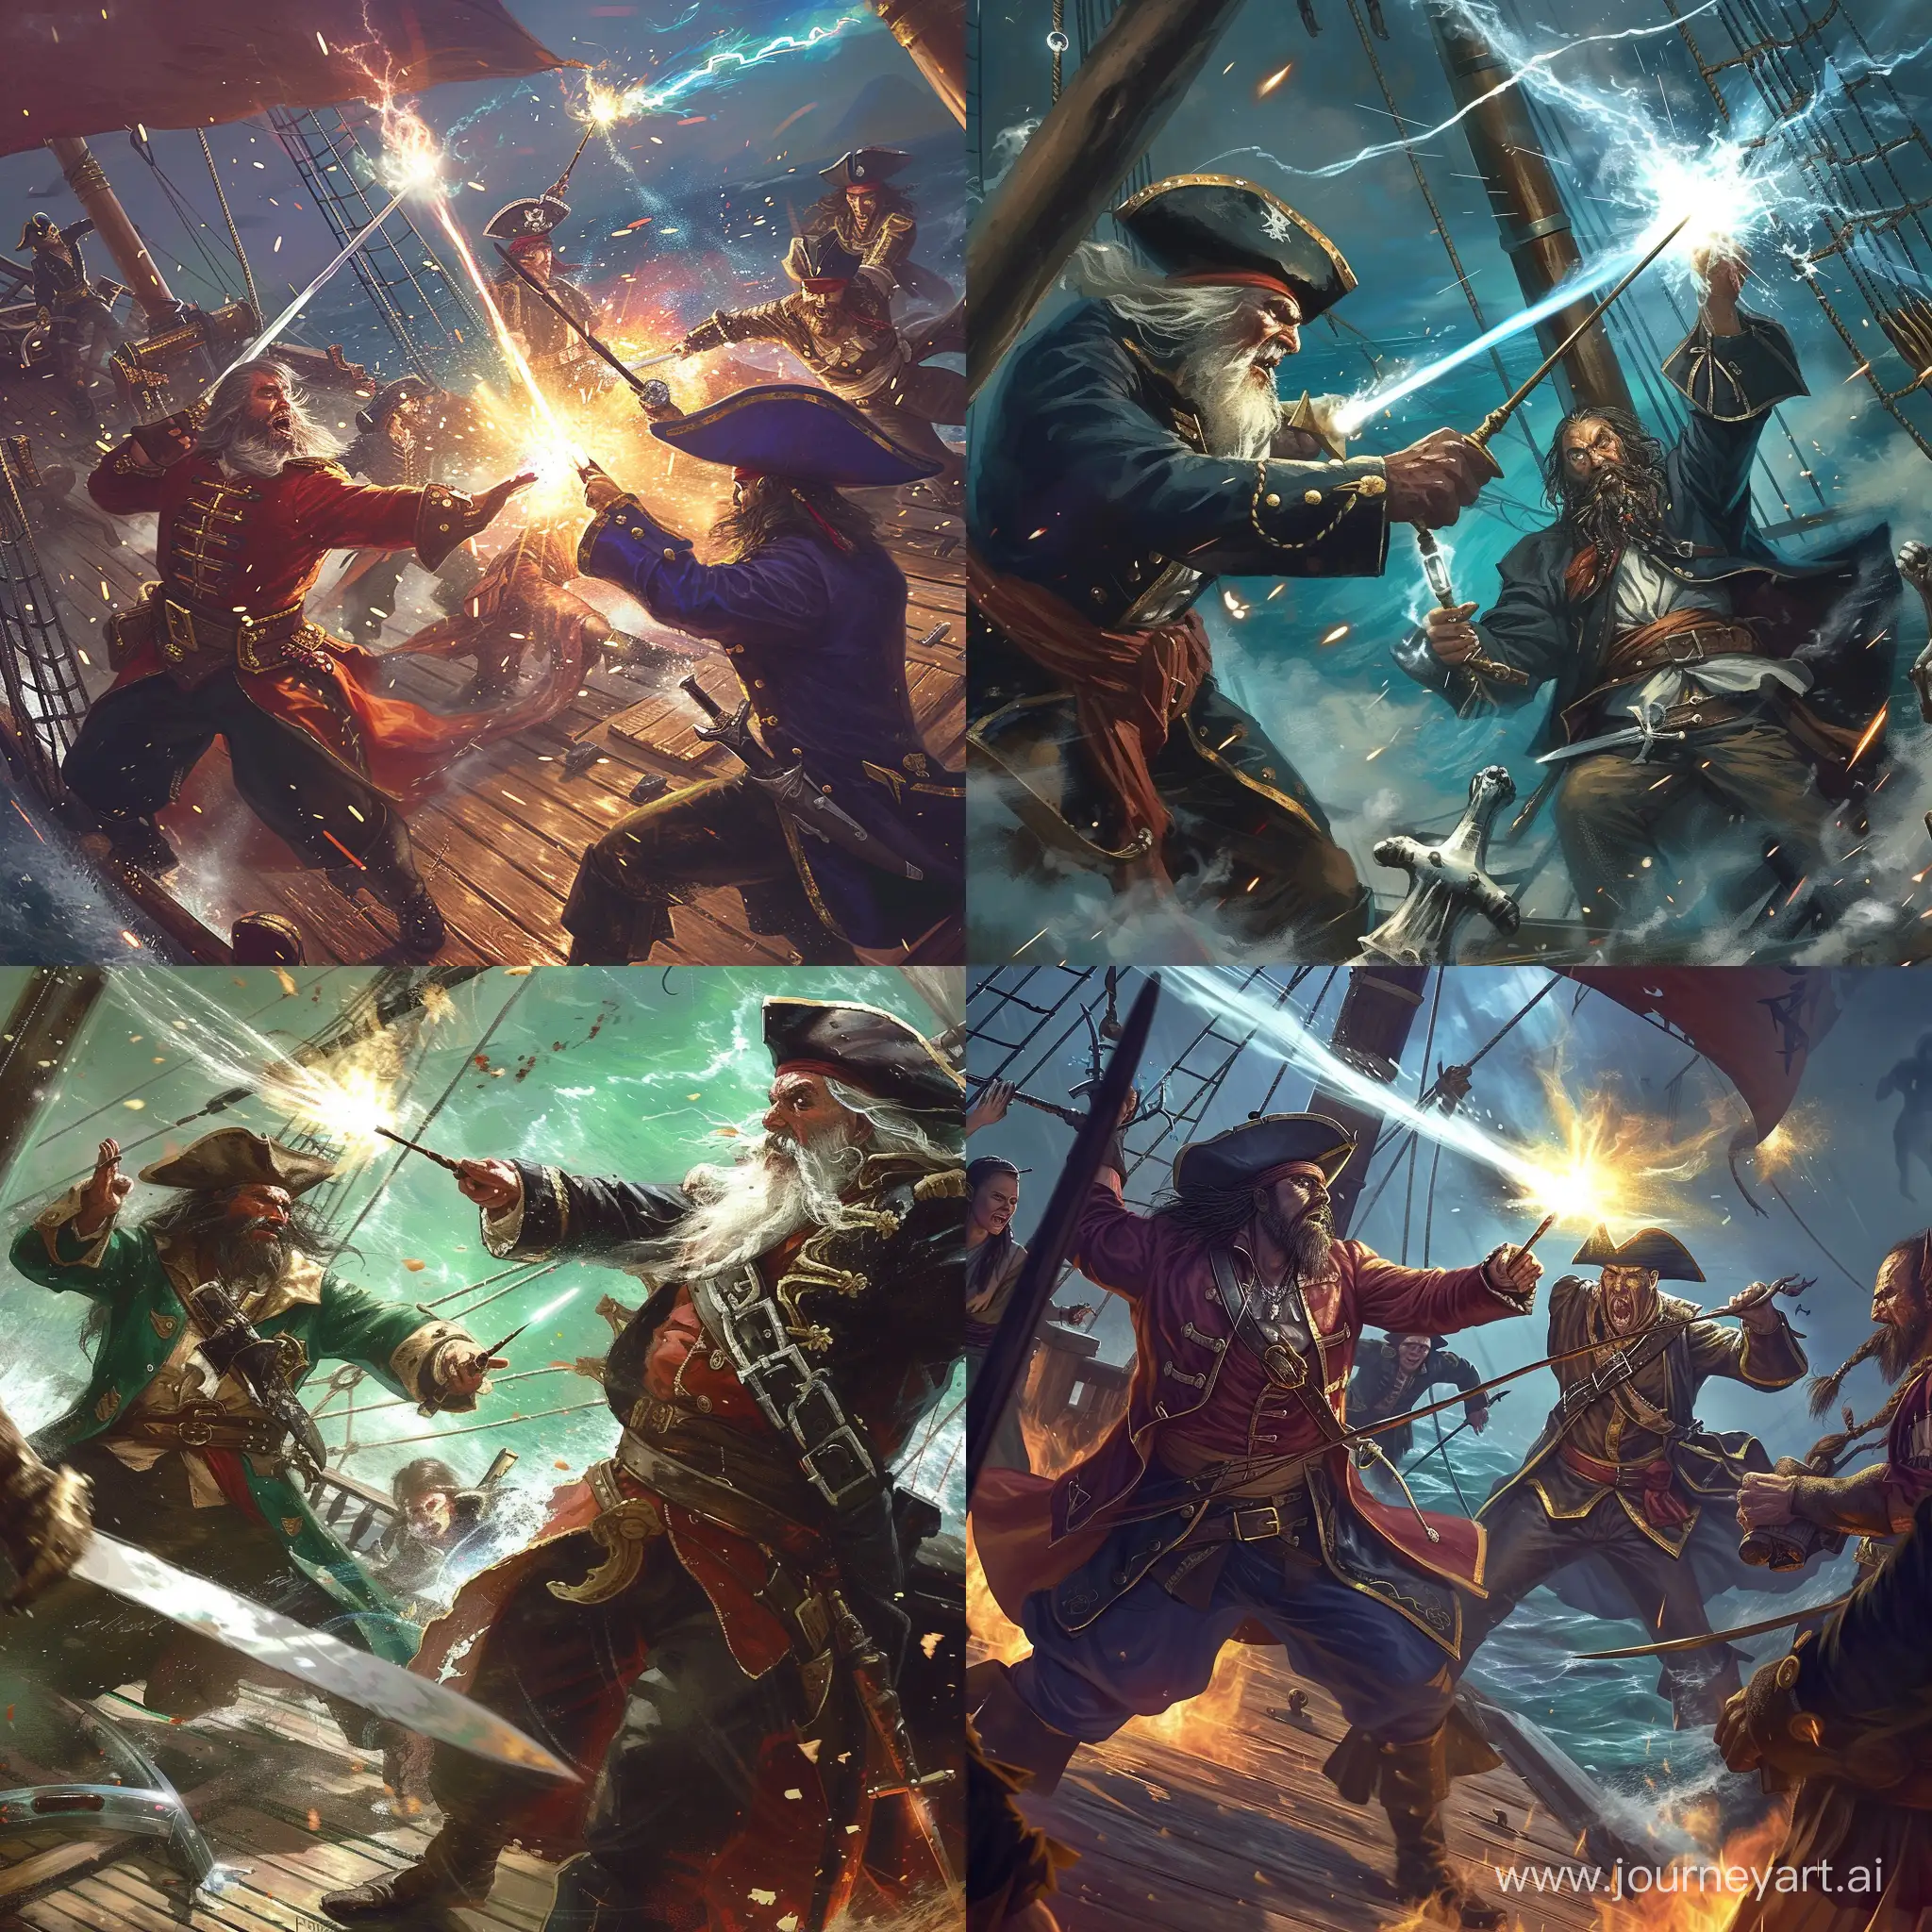 Epic-Battle-Wizards-Confront-Pirates-with-Magical-Spells